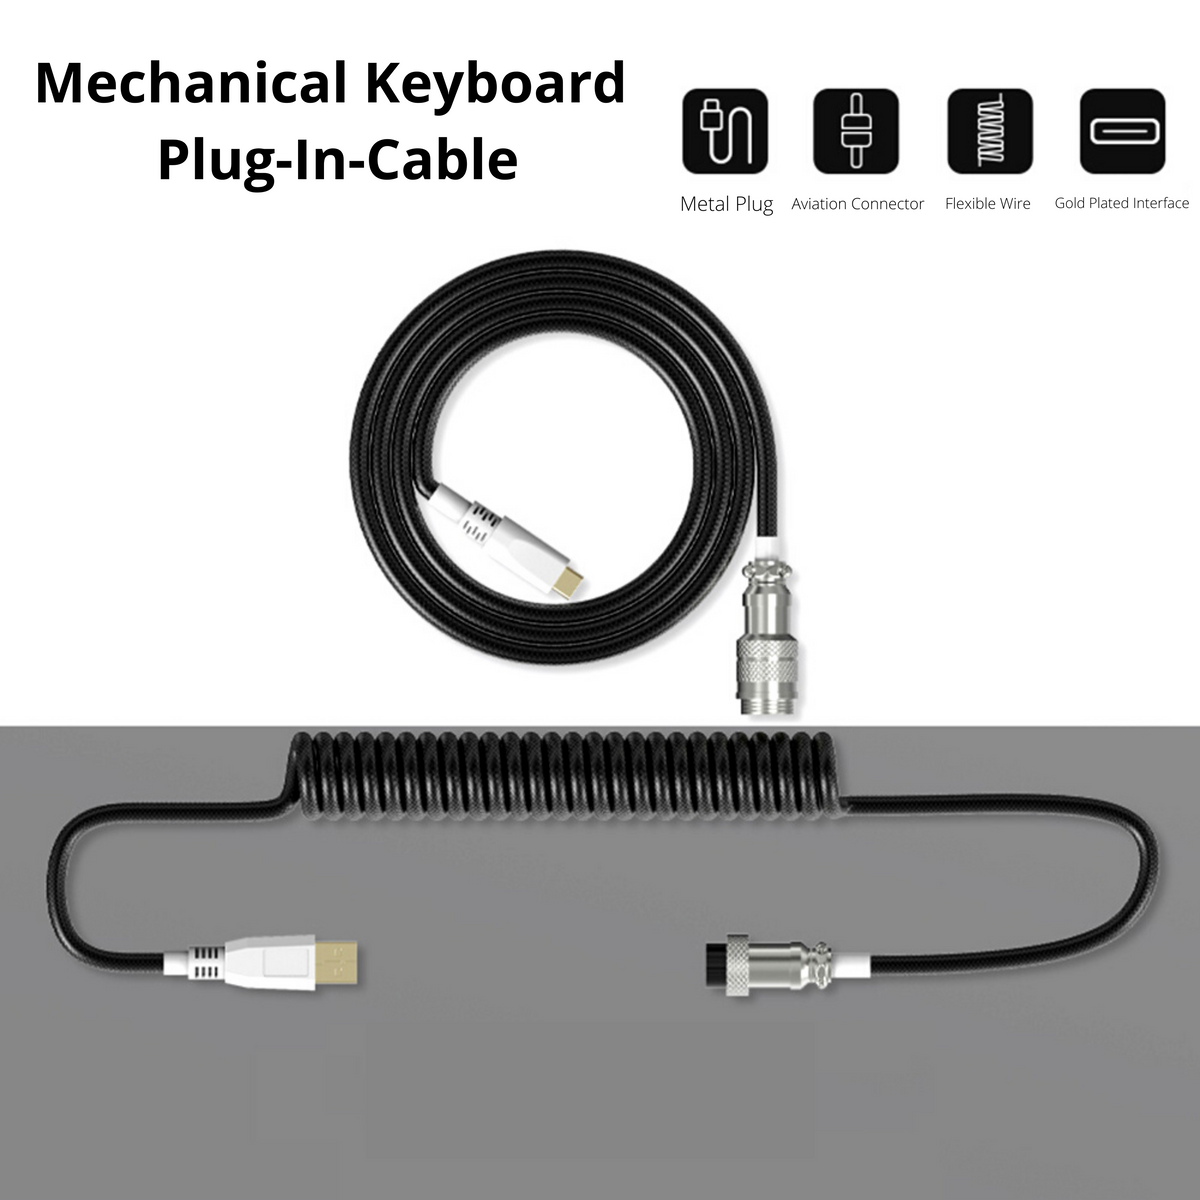 Black Keyboard Cable For Mechanical keyboards